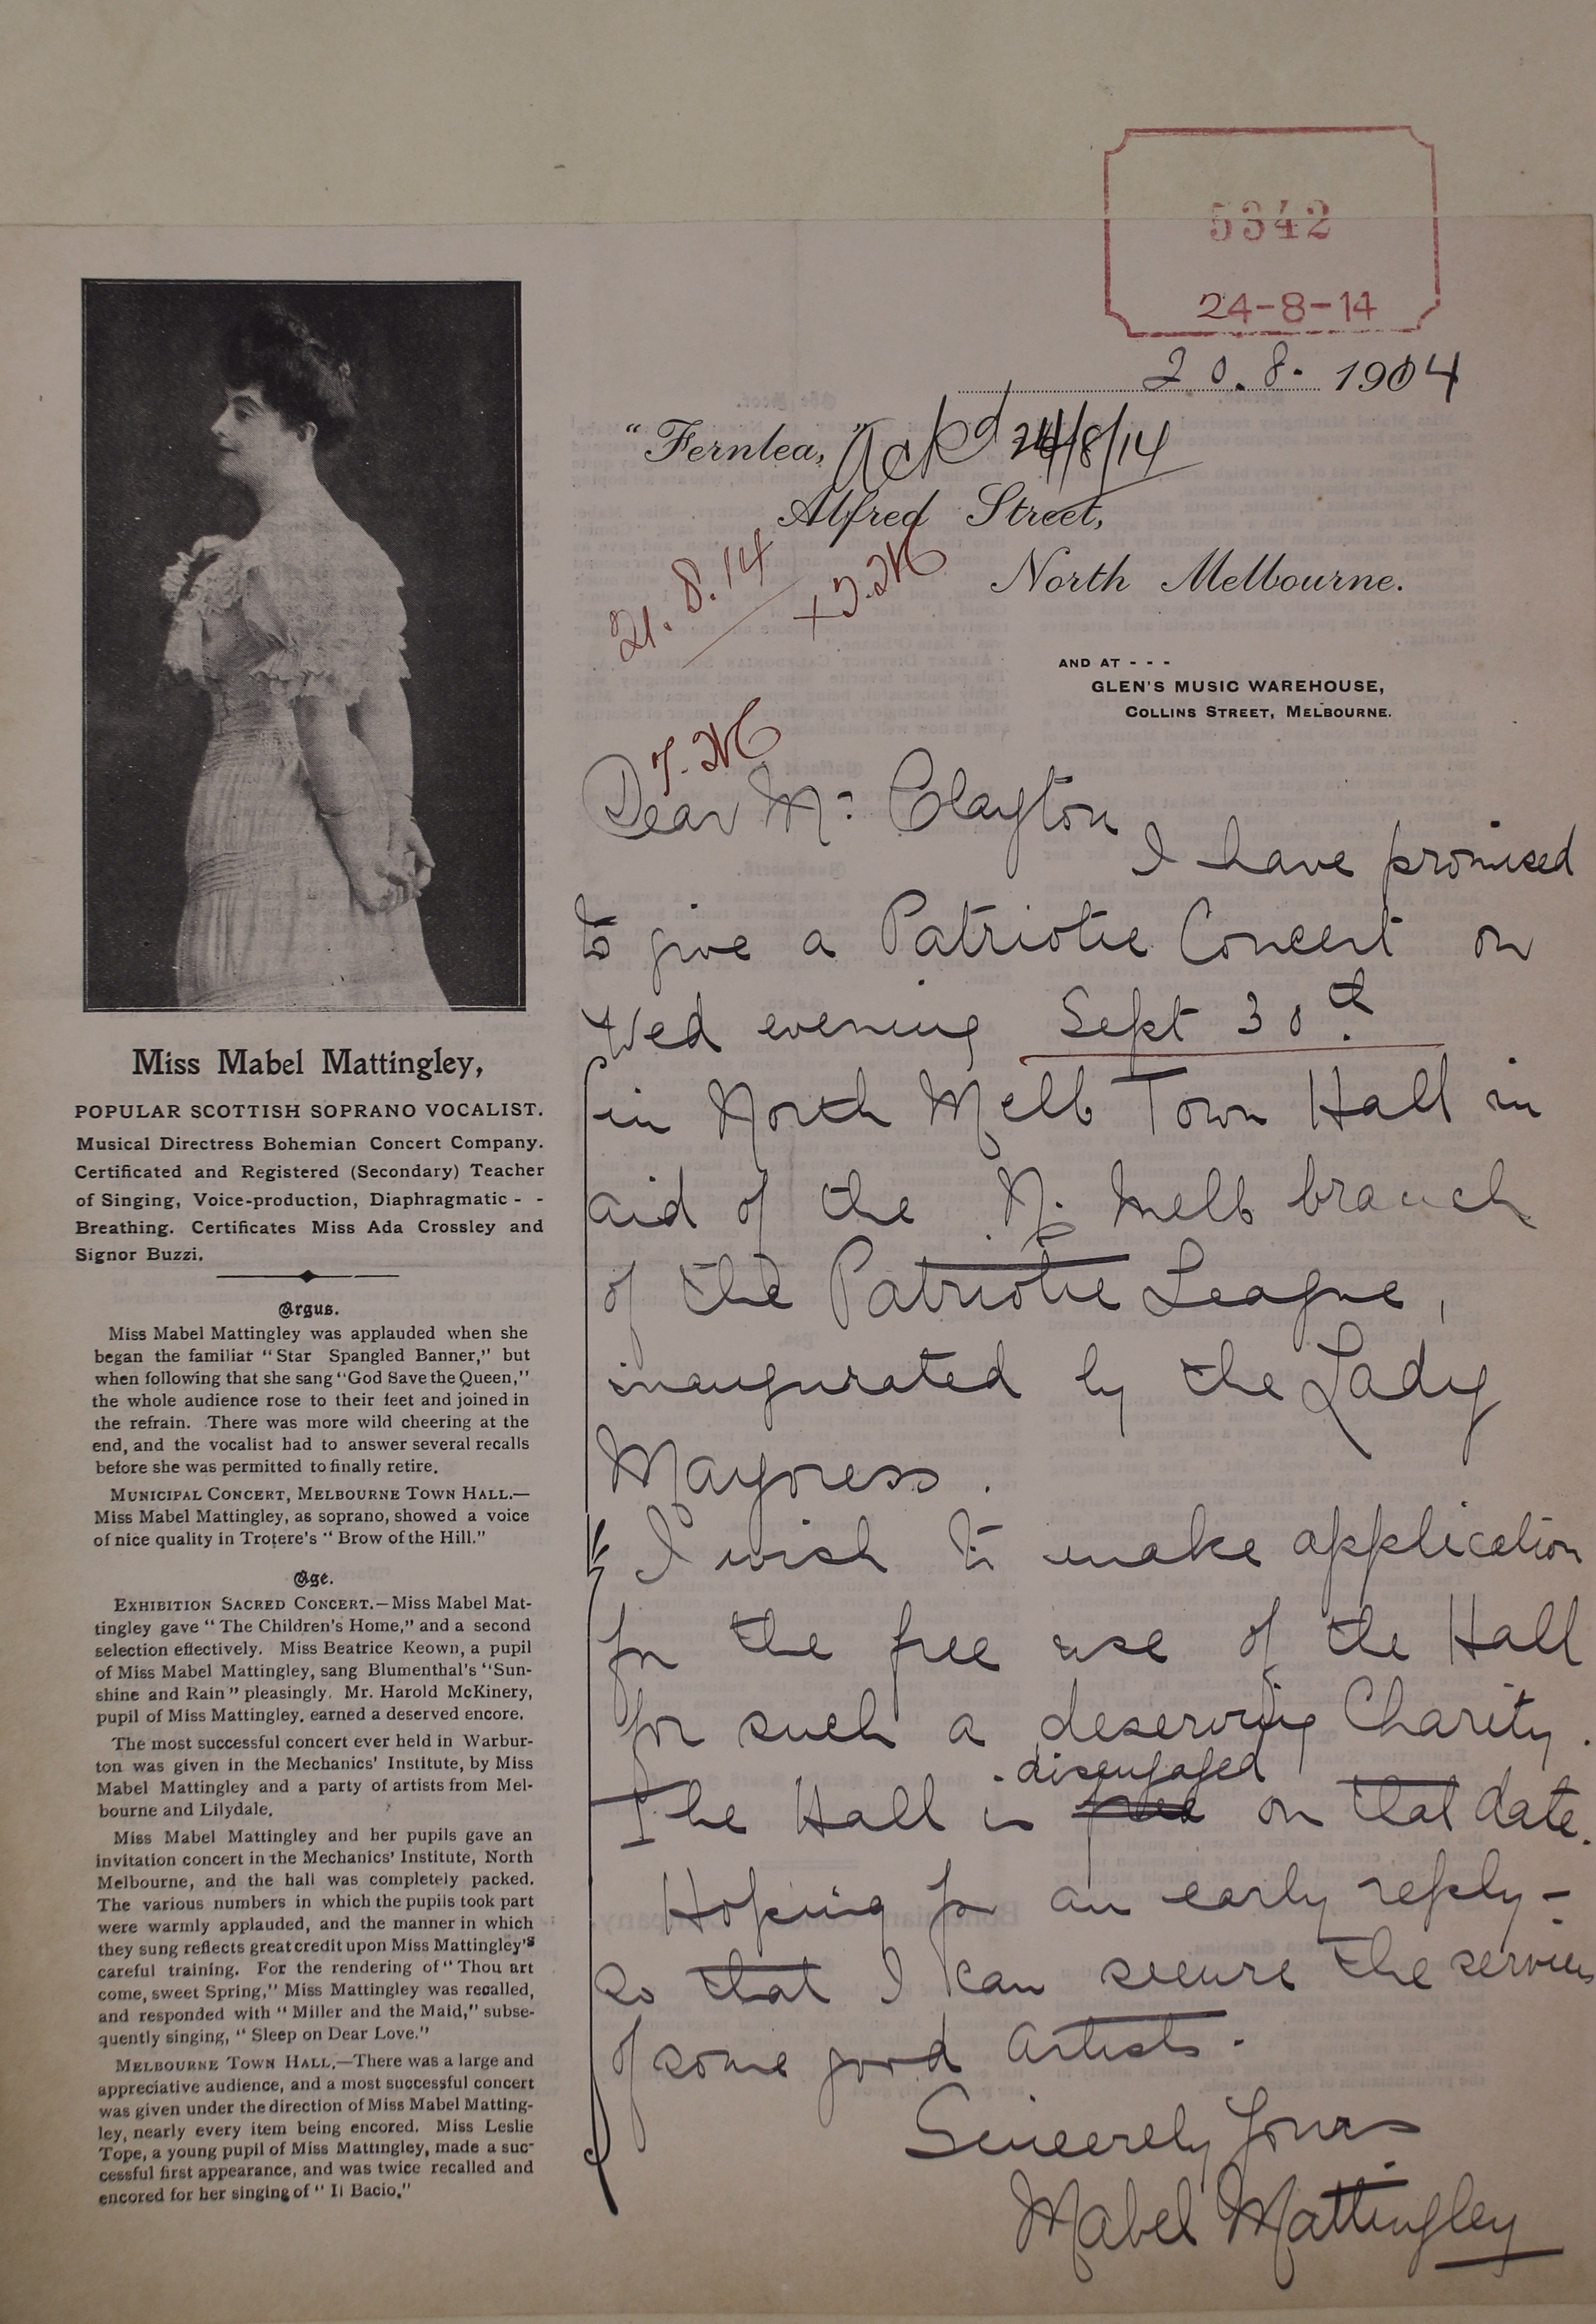 Image of letter regarding a Patriotic Concert featuring Mabel Mattingly.